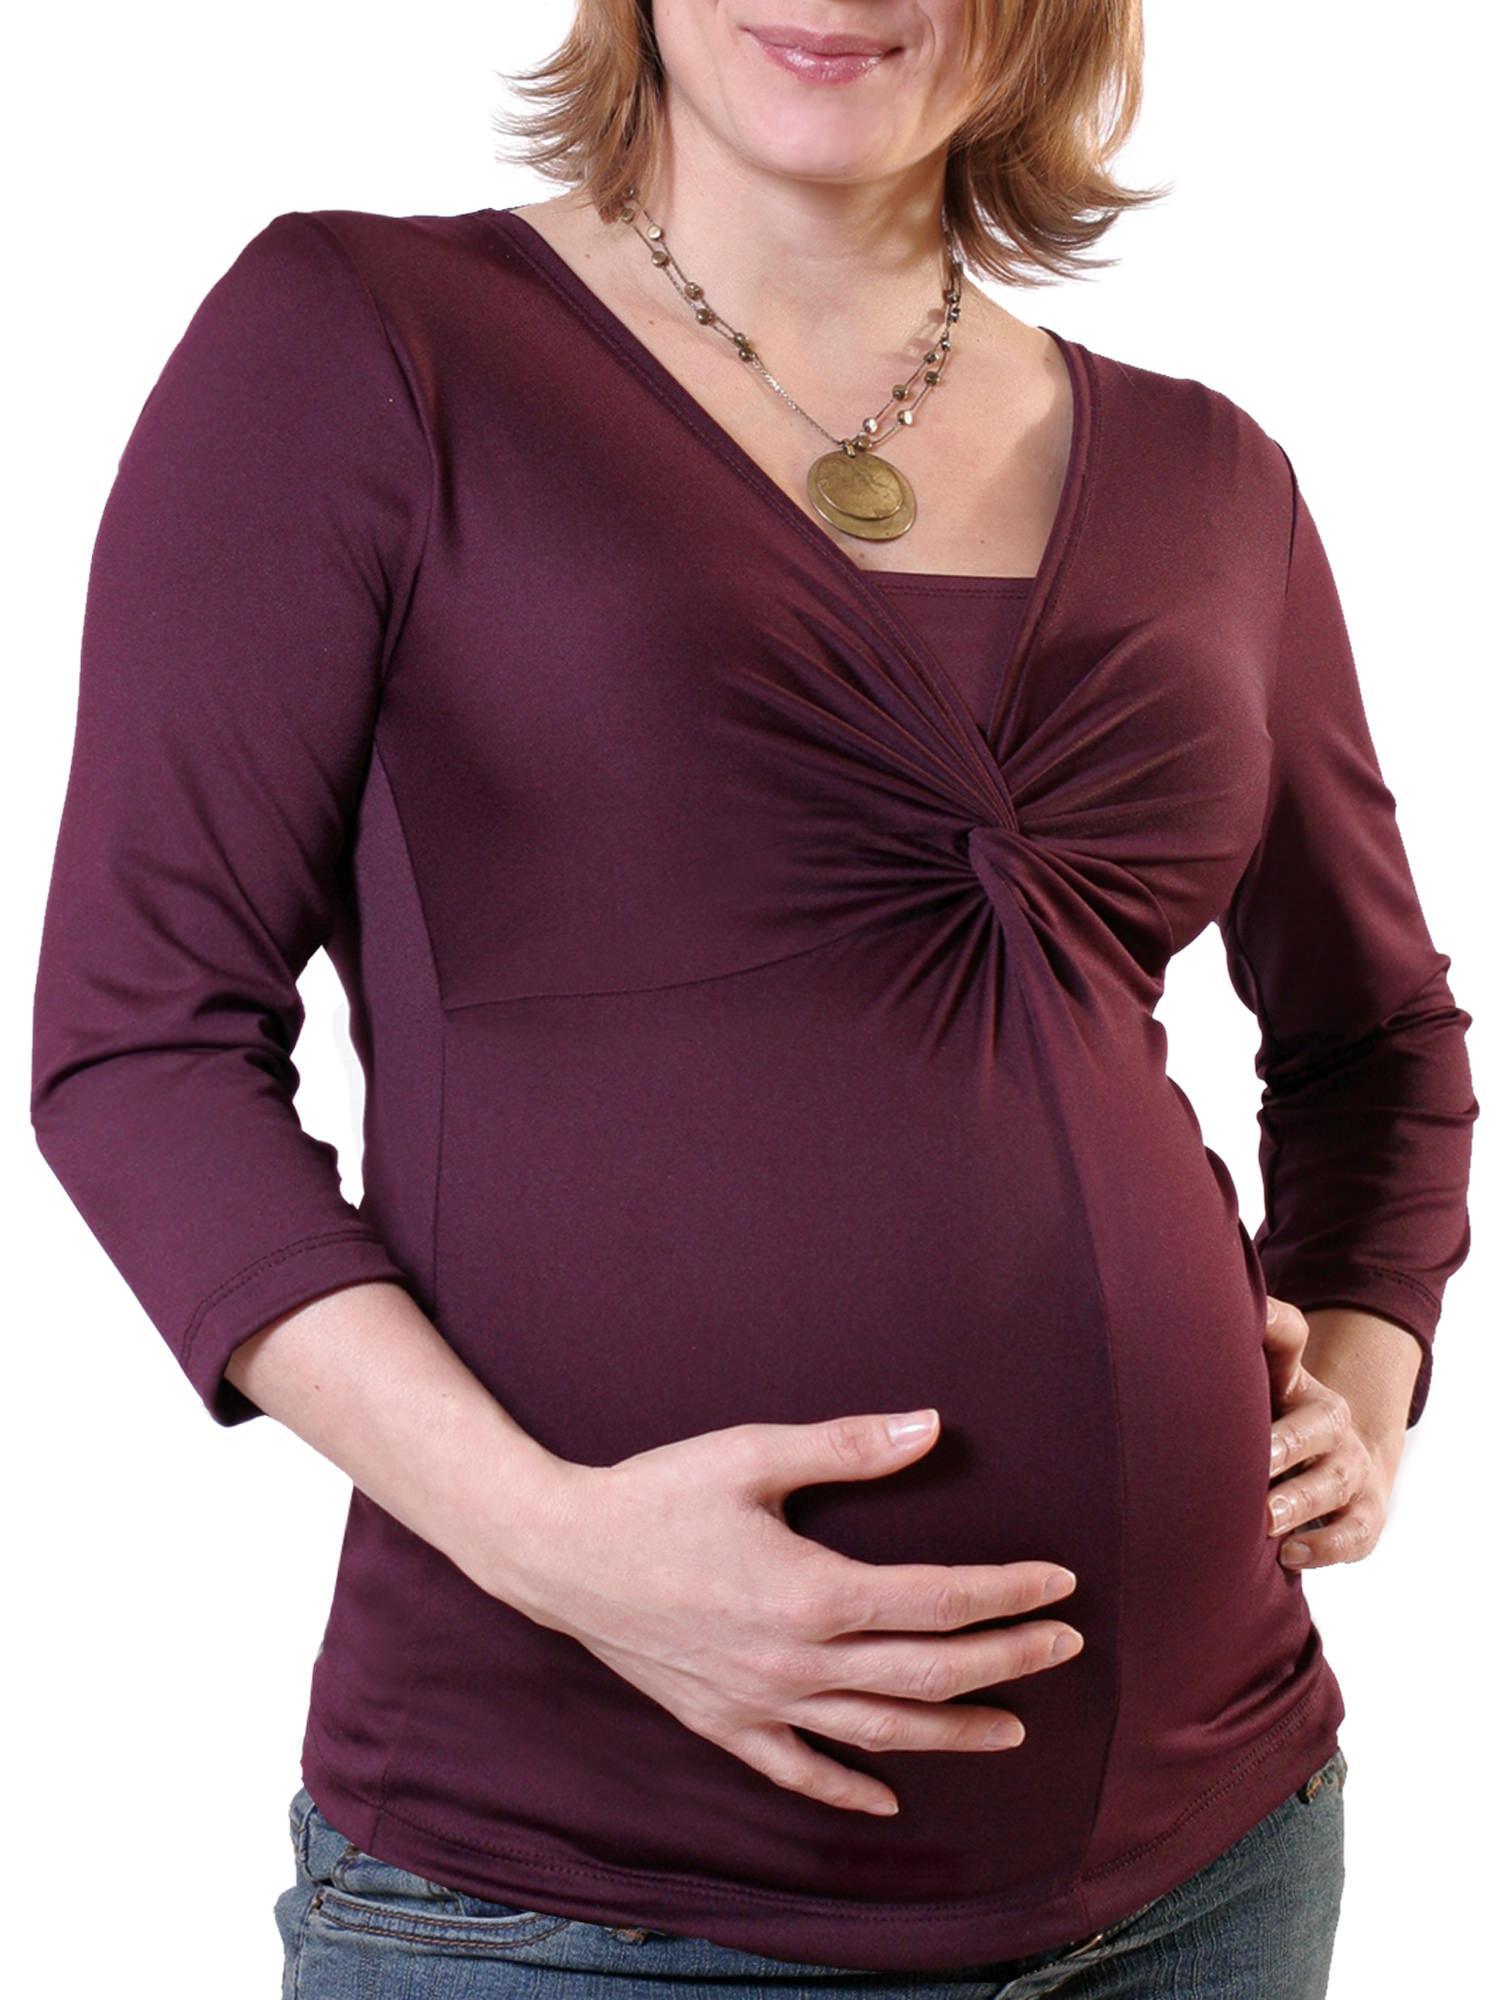 Jalie 2788 - Twist Top Pattern with Modesty Panel - Maternity-friendly